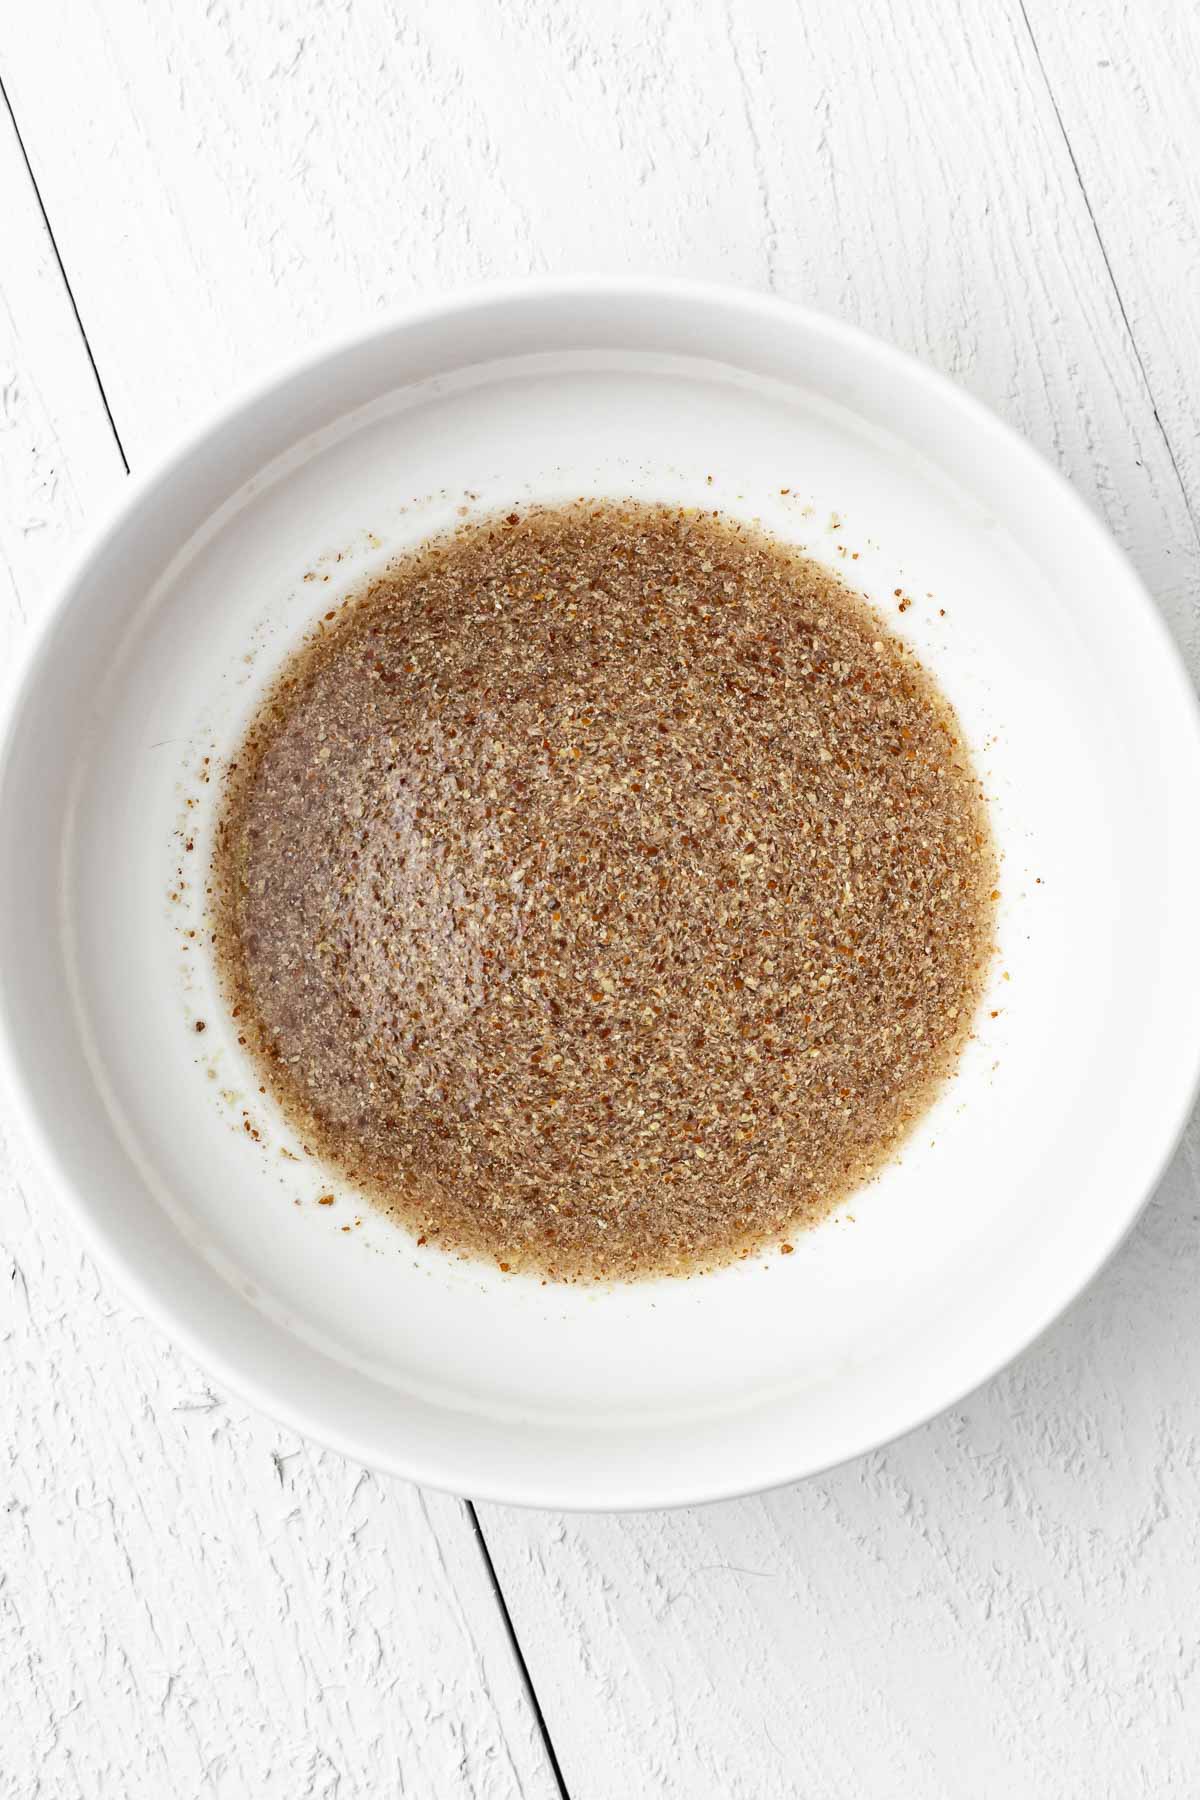 Flax and water "flax egg" mixture in a small white bowl.